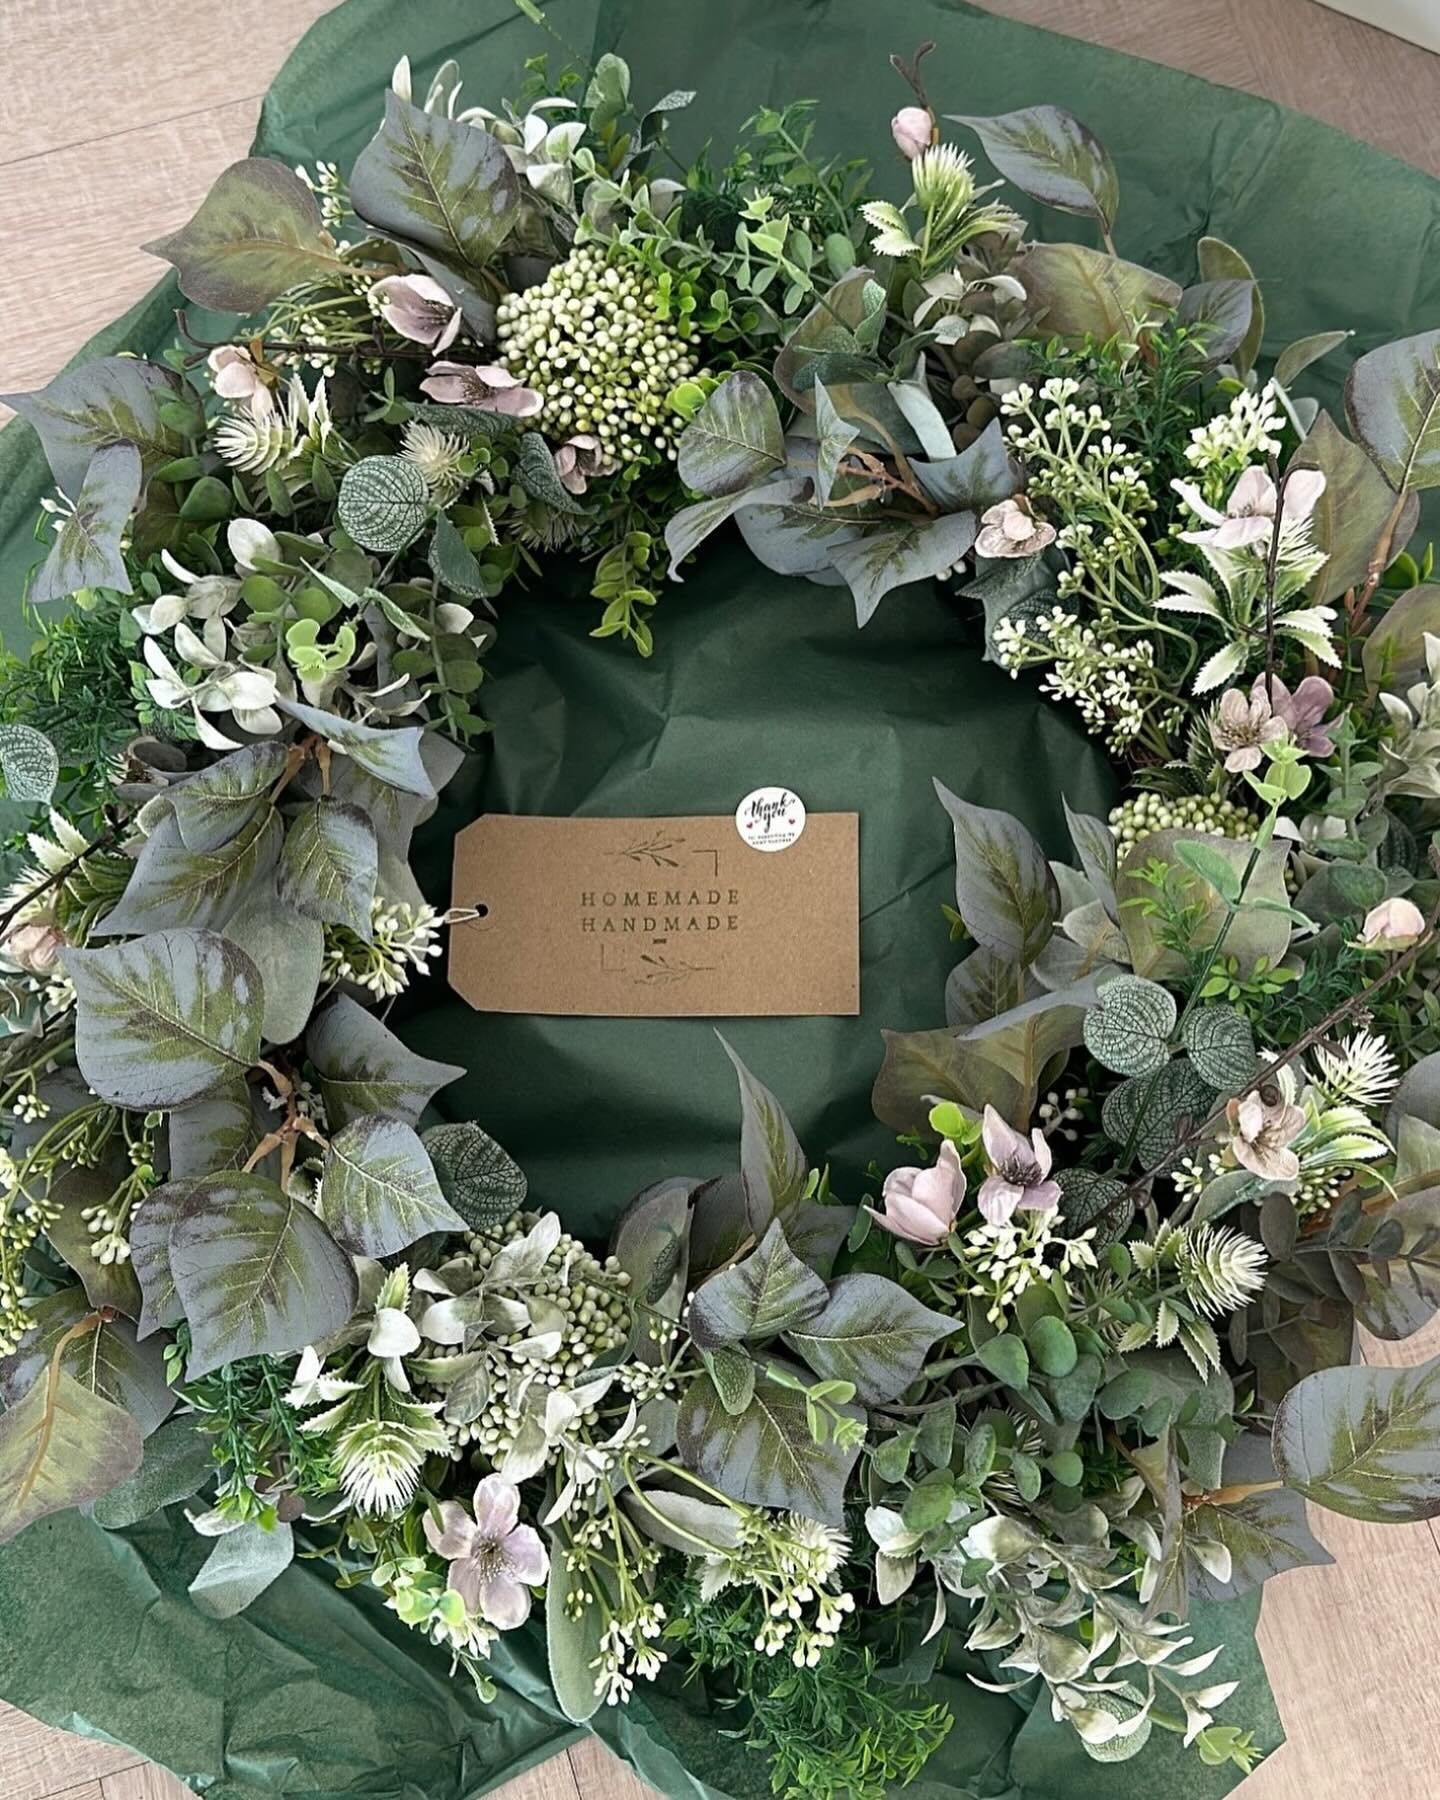 Spring Nordic green with apple blossom wreath. Just perfect for all year masses of green foliage and a touch of pale pink blossom. Available in 2 sizes 40 and 60cm, this is the 60cm. #appleblossom #fauxwreaths #artificialwreaths